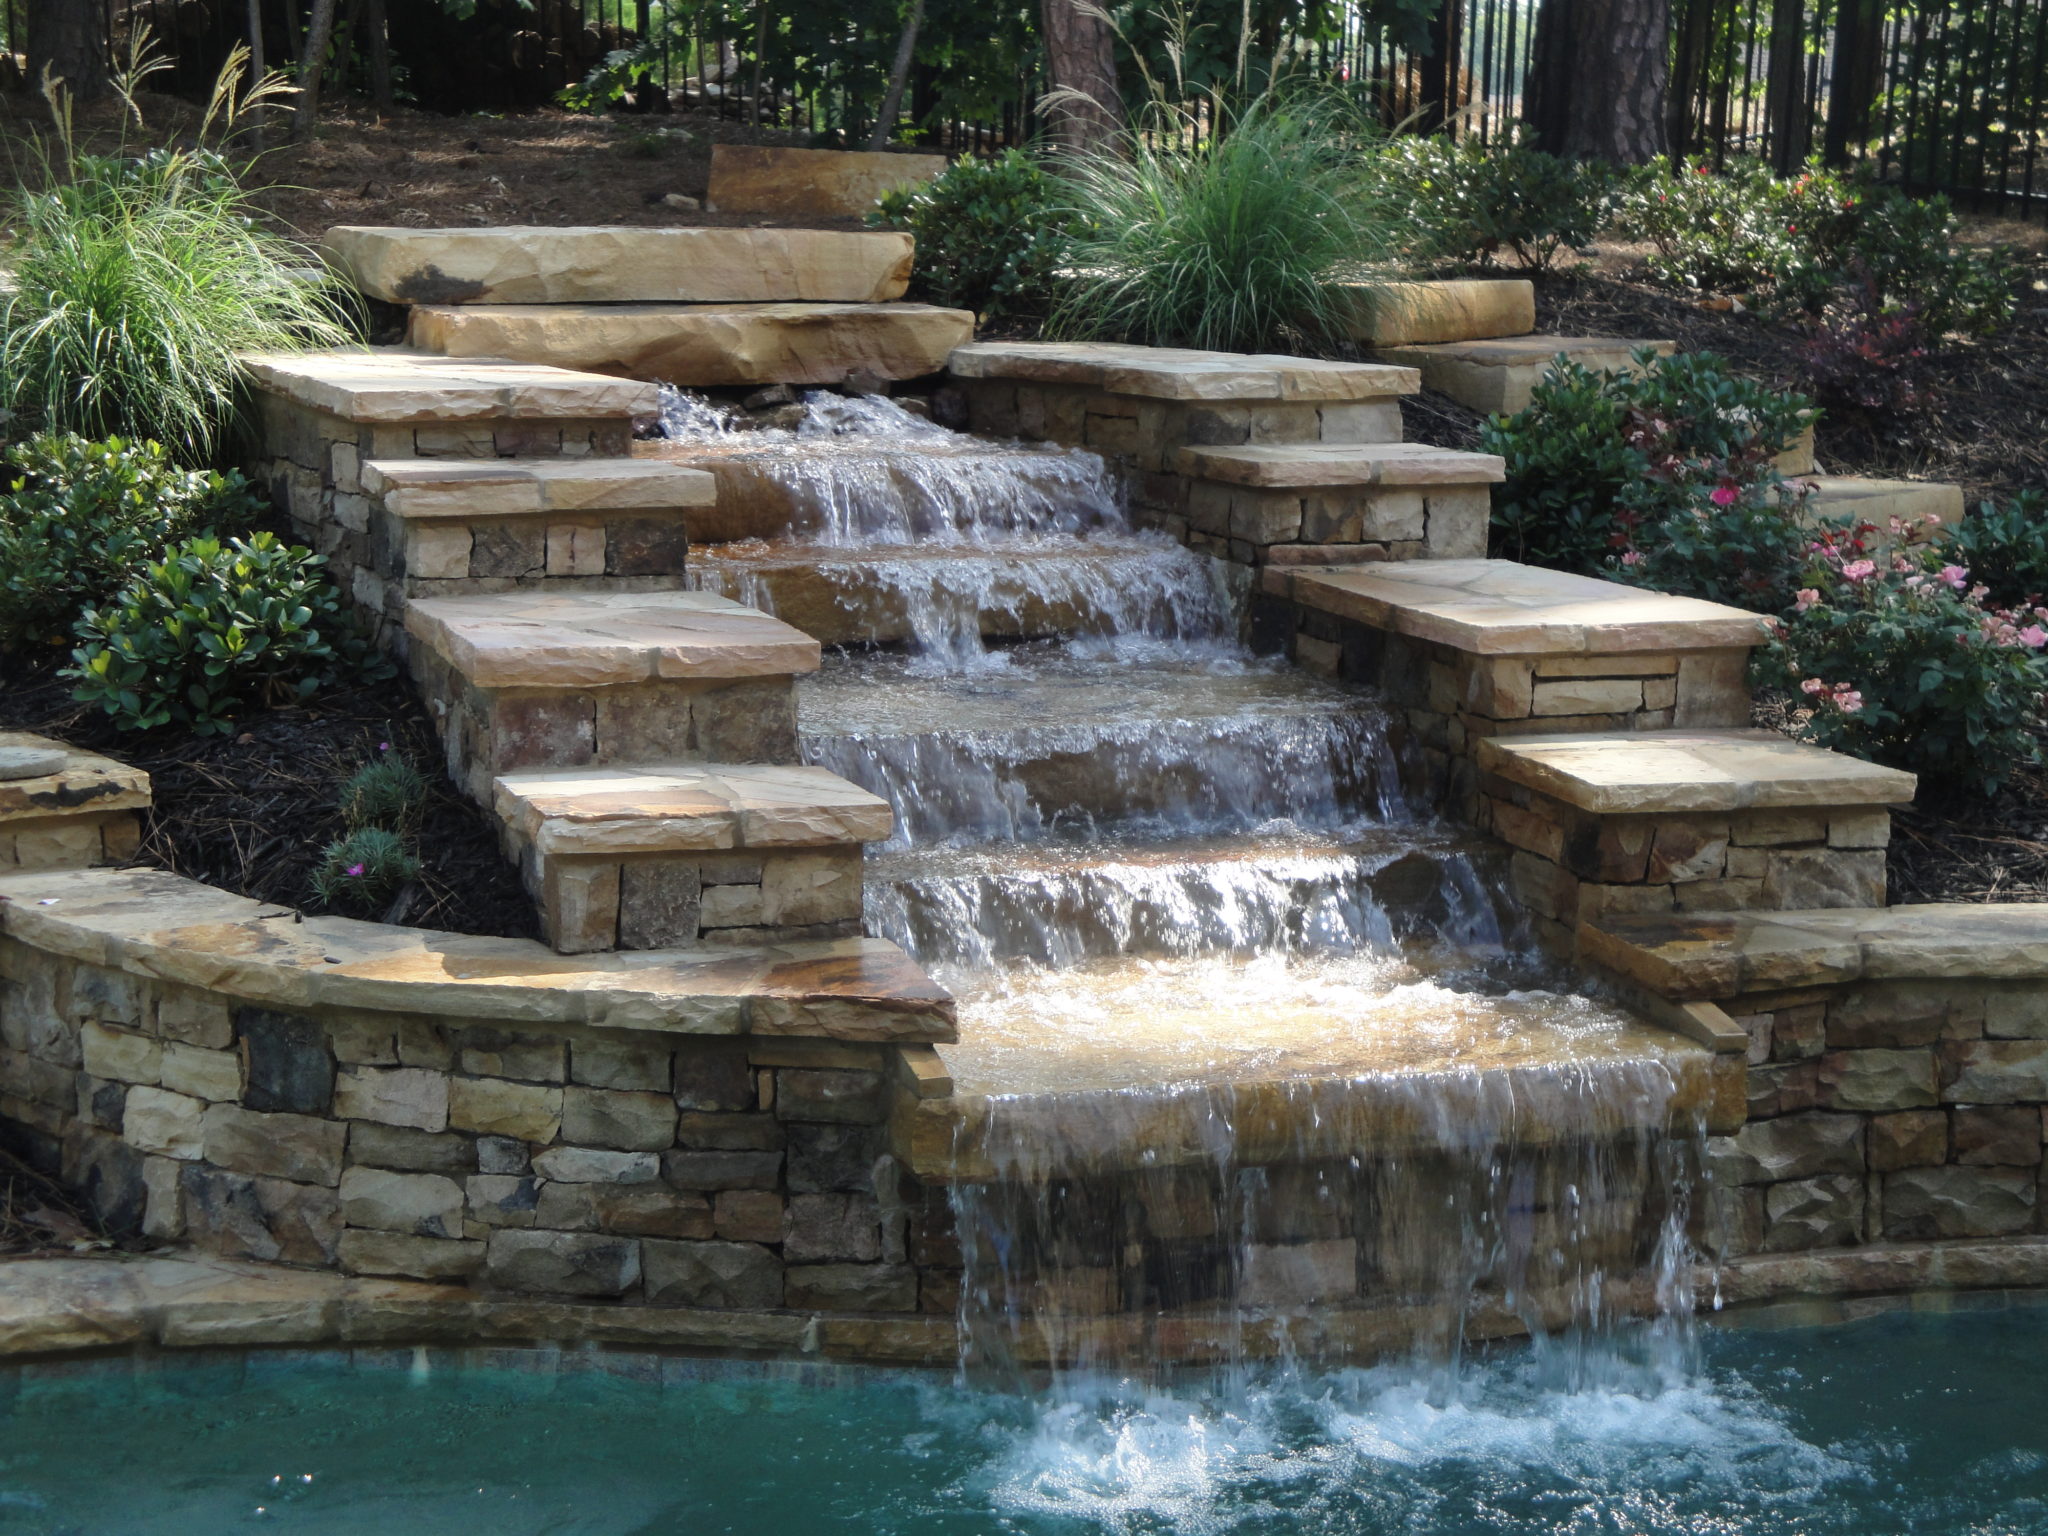 A five-tier stone waterfall cascading into a swimming pool.